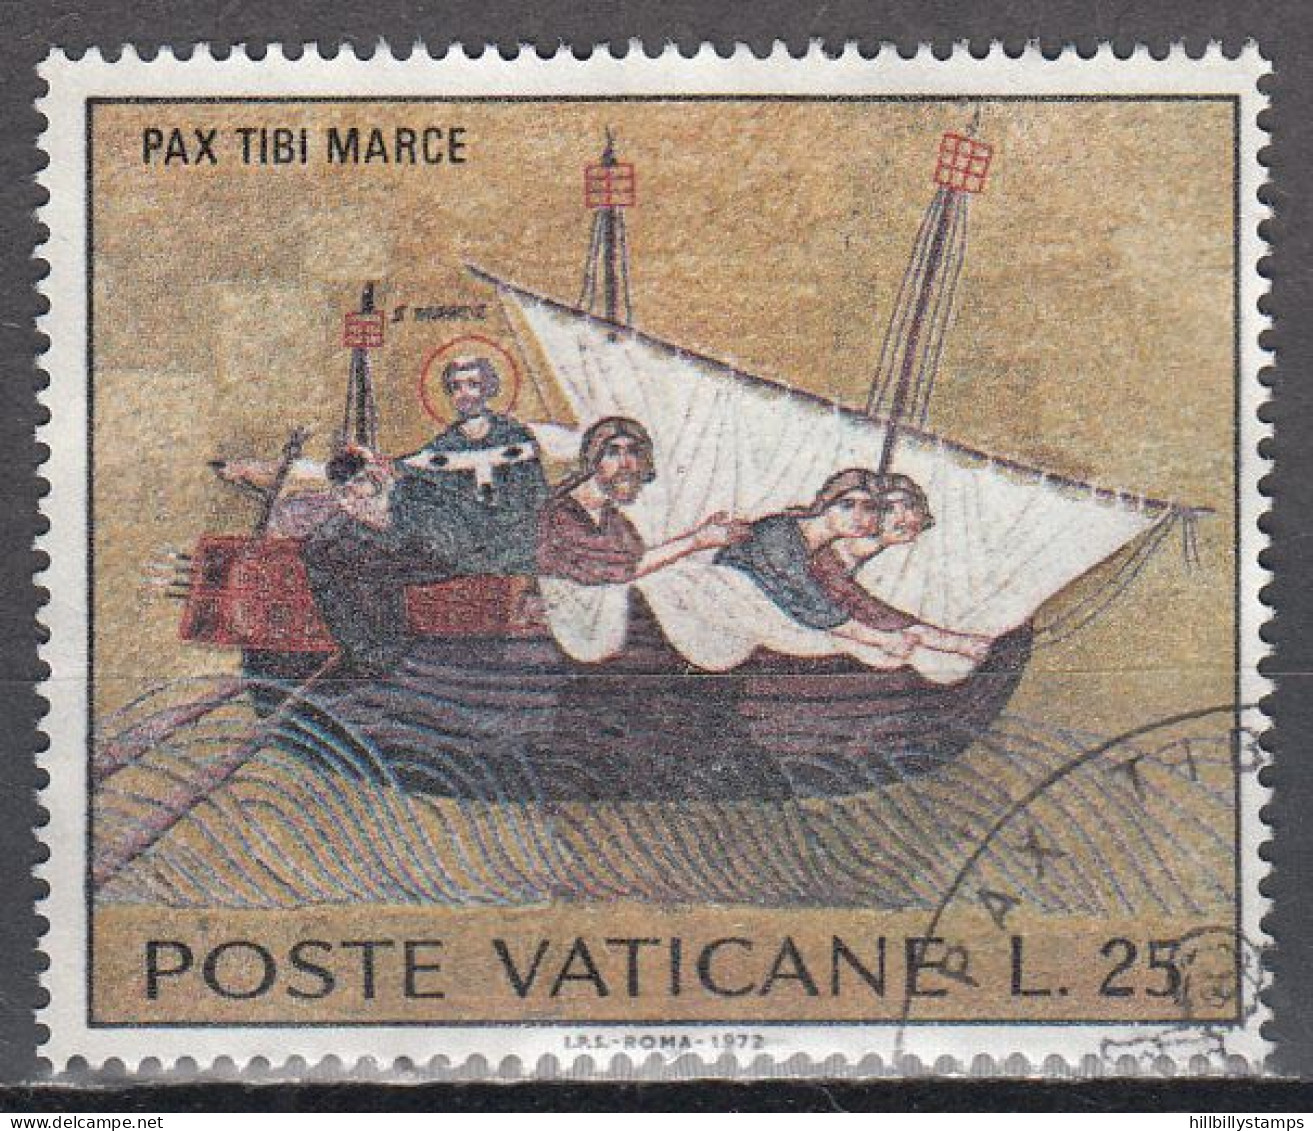 VATICAN   SCOTT NO 518   USED   YEAR  1972 - Used Stamps